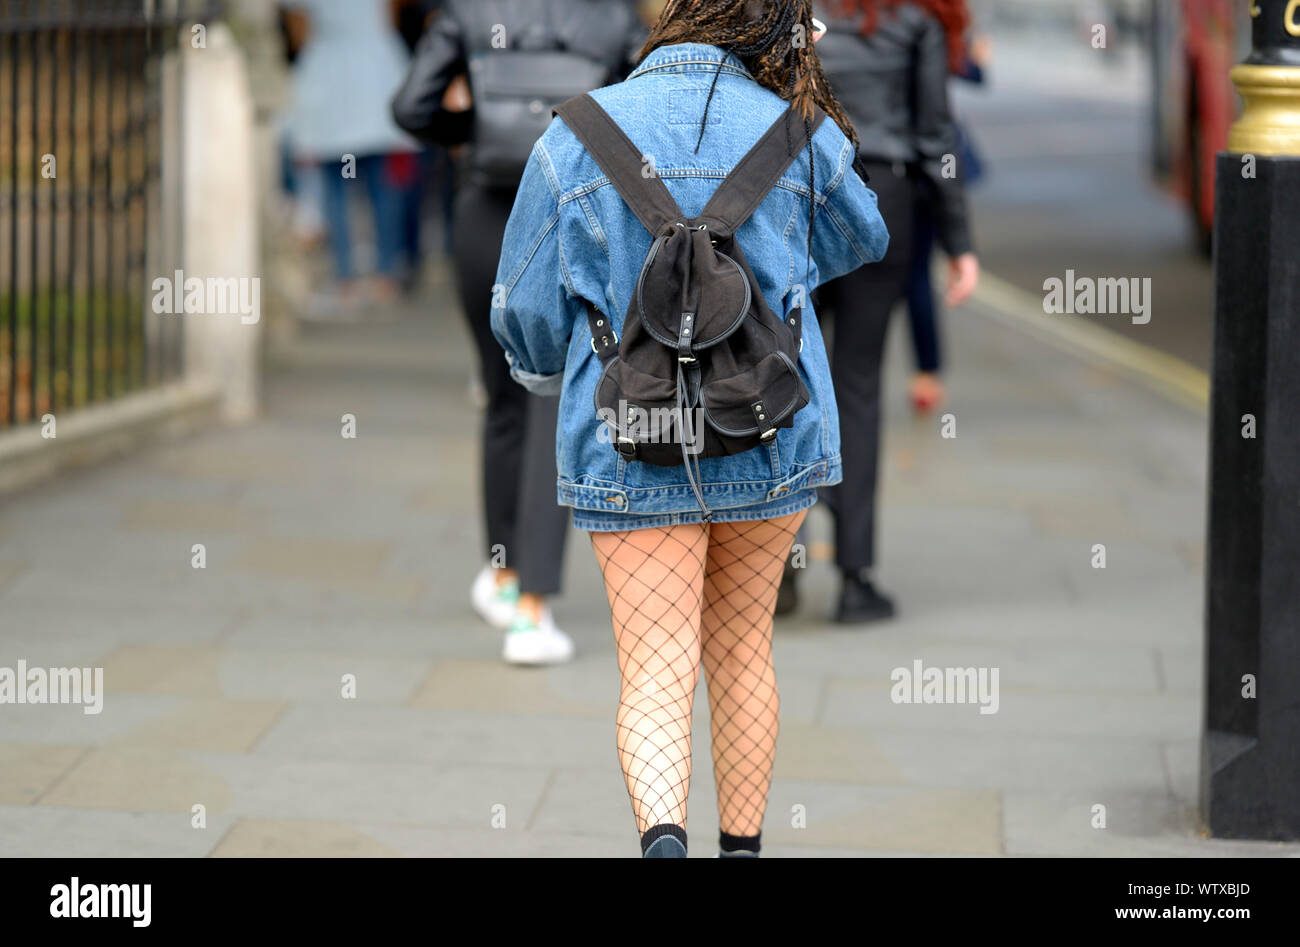 London, England, UK. Young woman with a small rucksach, denim jacket and fishnets Stock Photo